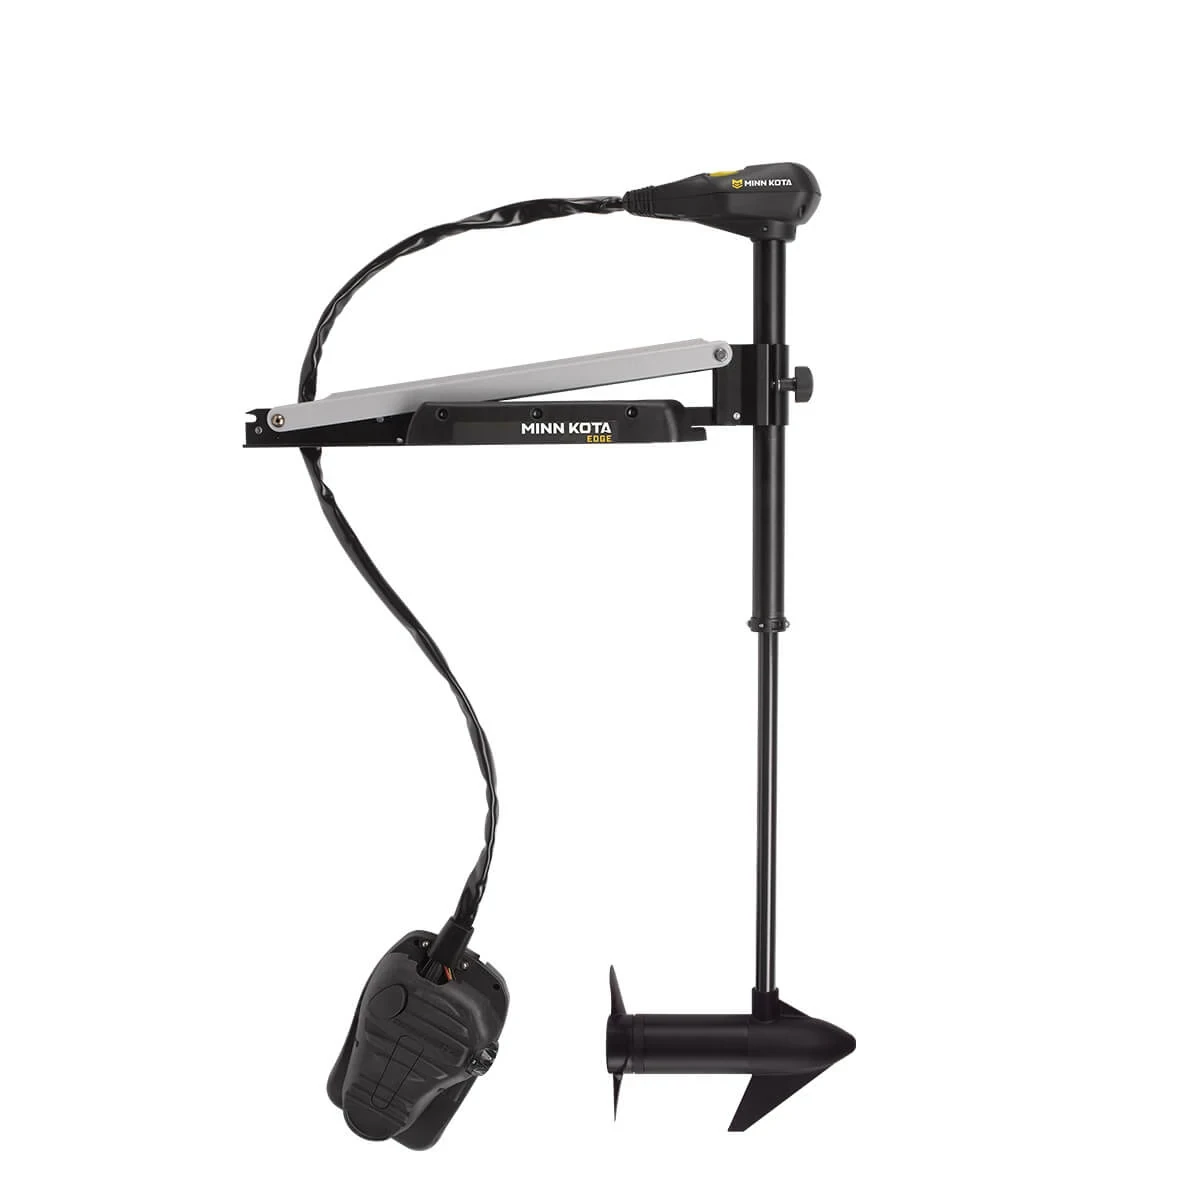 Edge 45 pound thrust trolling motor with foot pedal